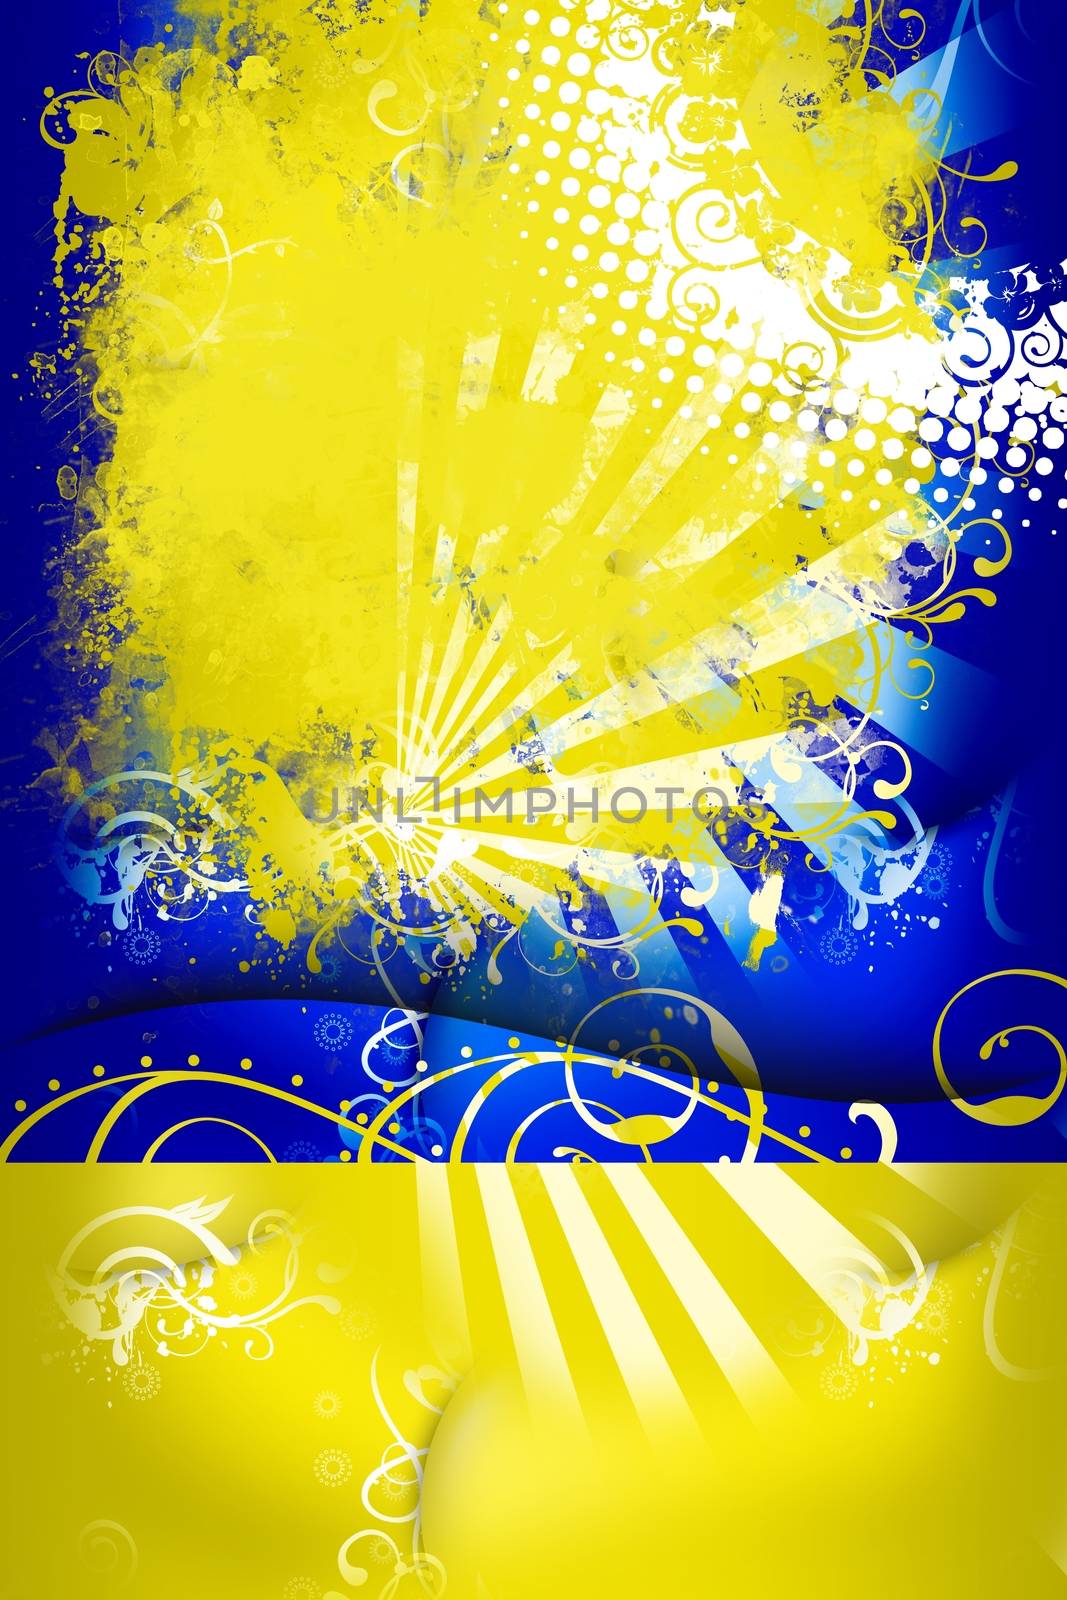 Cool Dark Blue - Yellow-Kiwi Grunge Background (Copy Space) with Grunge Rays and Floral Elements. Vertical Design